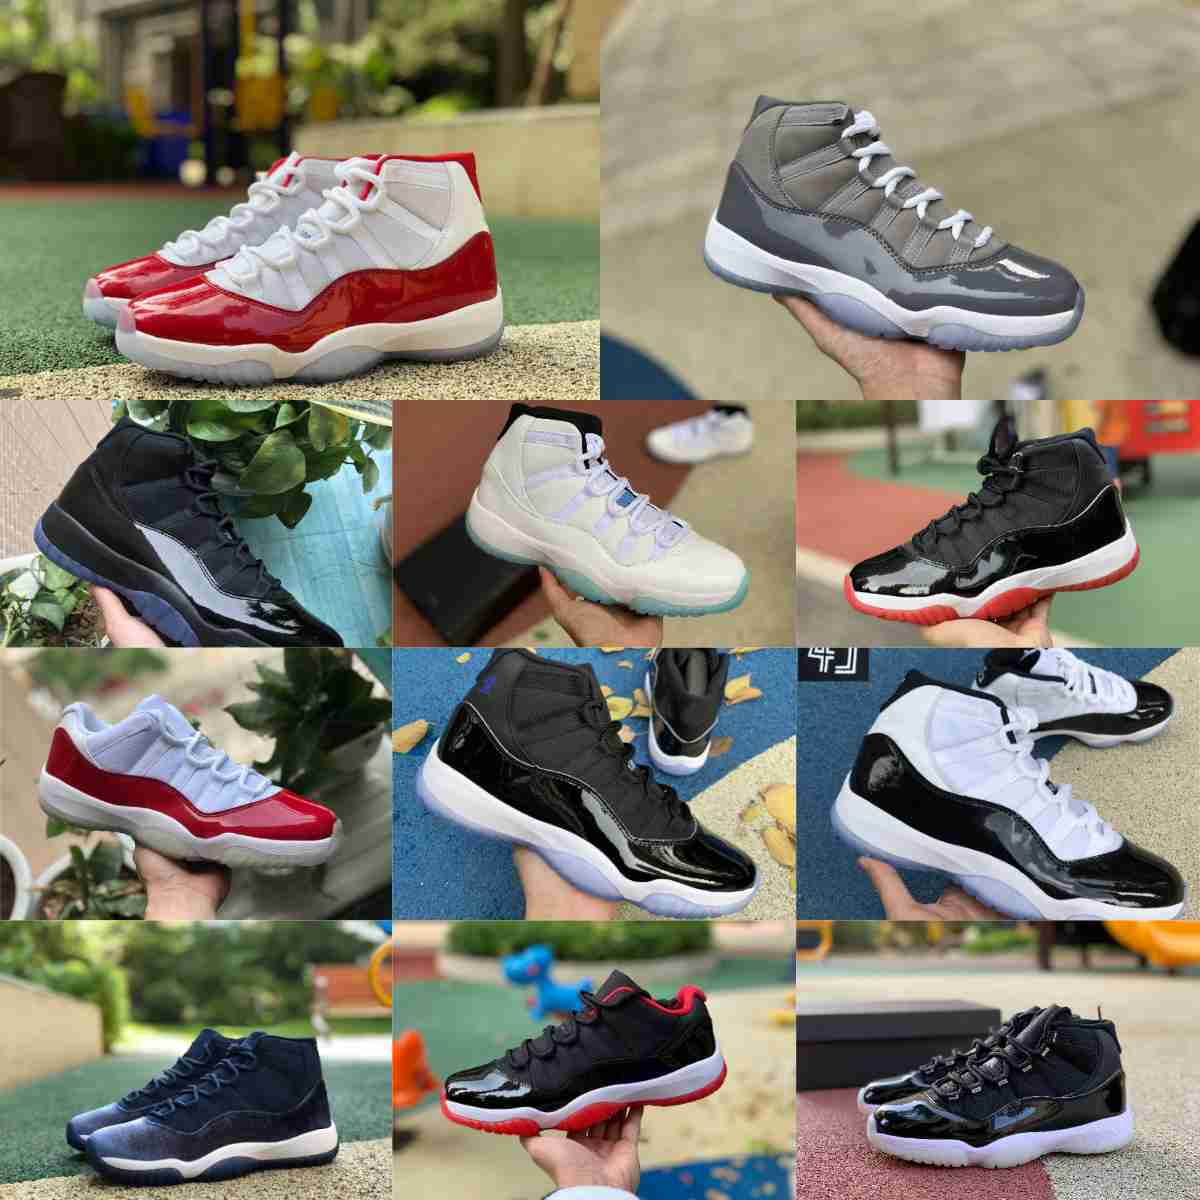 

Jumpman Cherry Red 11 11s High Basketball Shoes Trainer Men Women Jubilee COOL GREY Playoffs Bred Space Jam Gamma Blue Concord 45 Low Outdoor Designers Sneakers S9, Please contact us